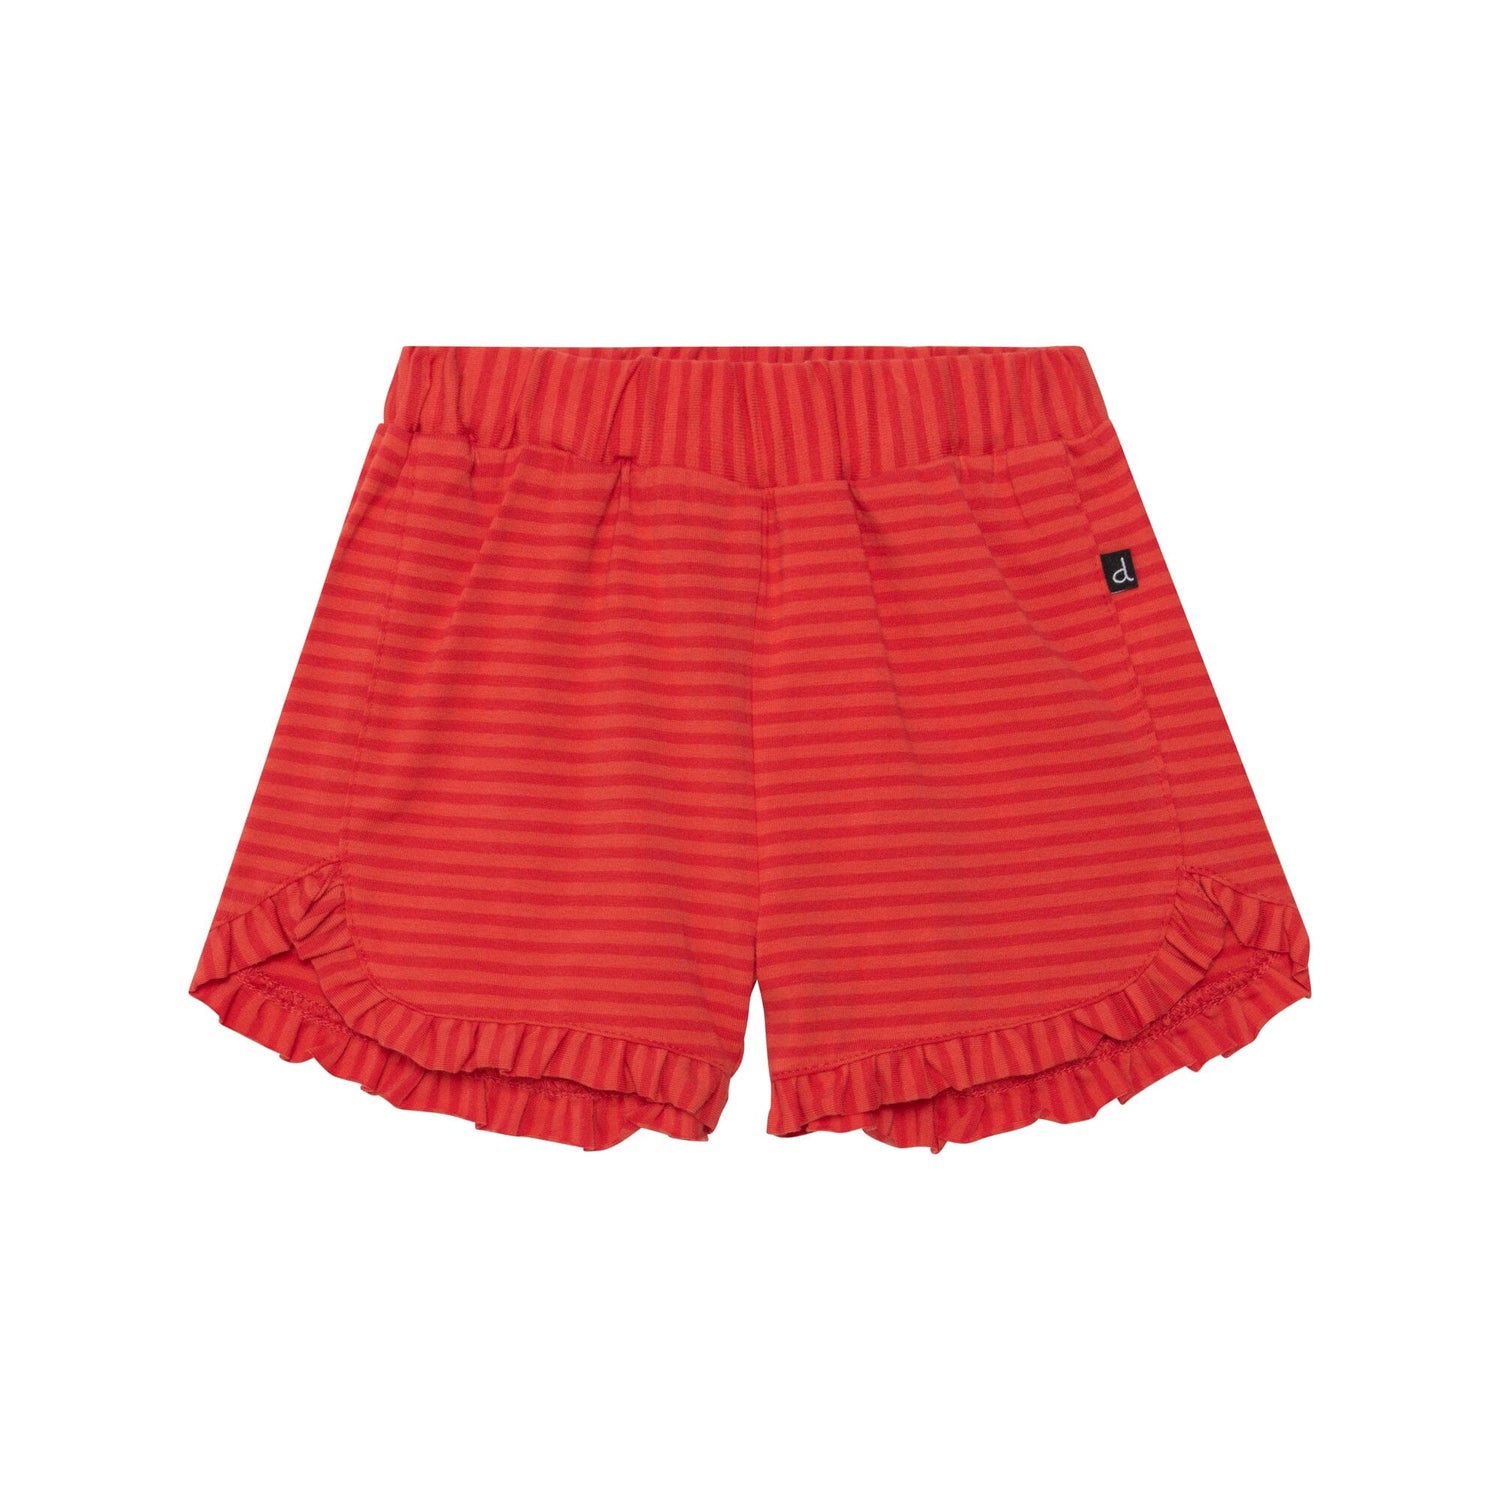 Organic Cotton Striped Short With Frill Red - E30F26_047